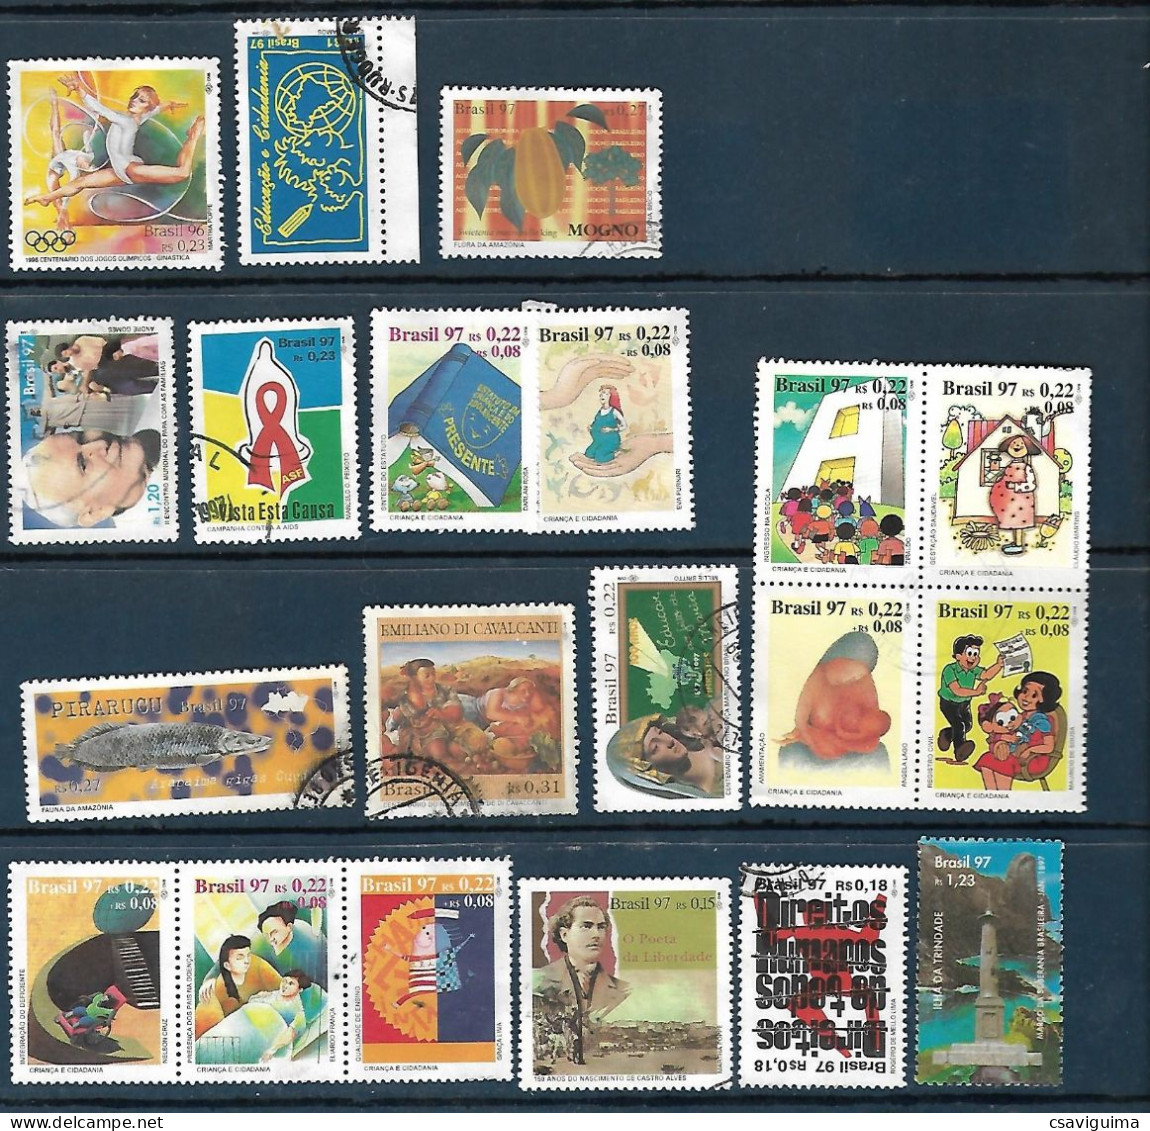 Brasil (Brazil) - 1997 - Set 20 Stamps: Used, Hinged (##3) - Used Stamps